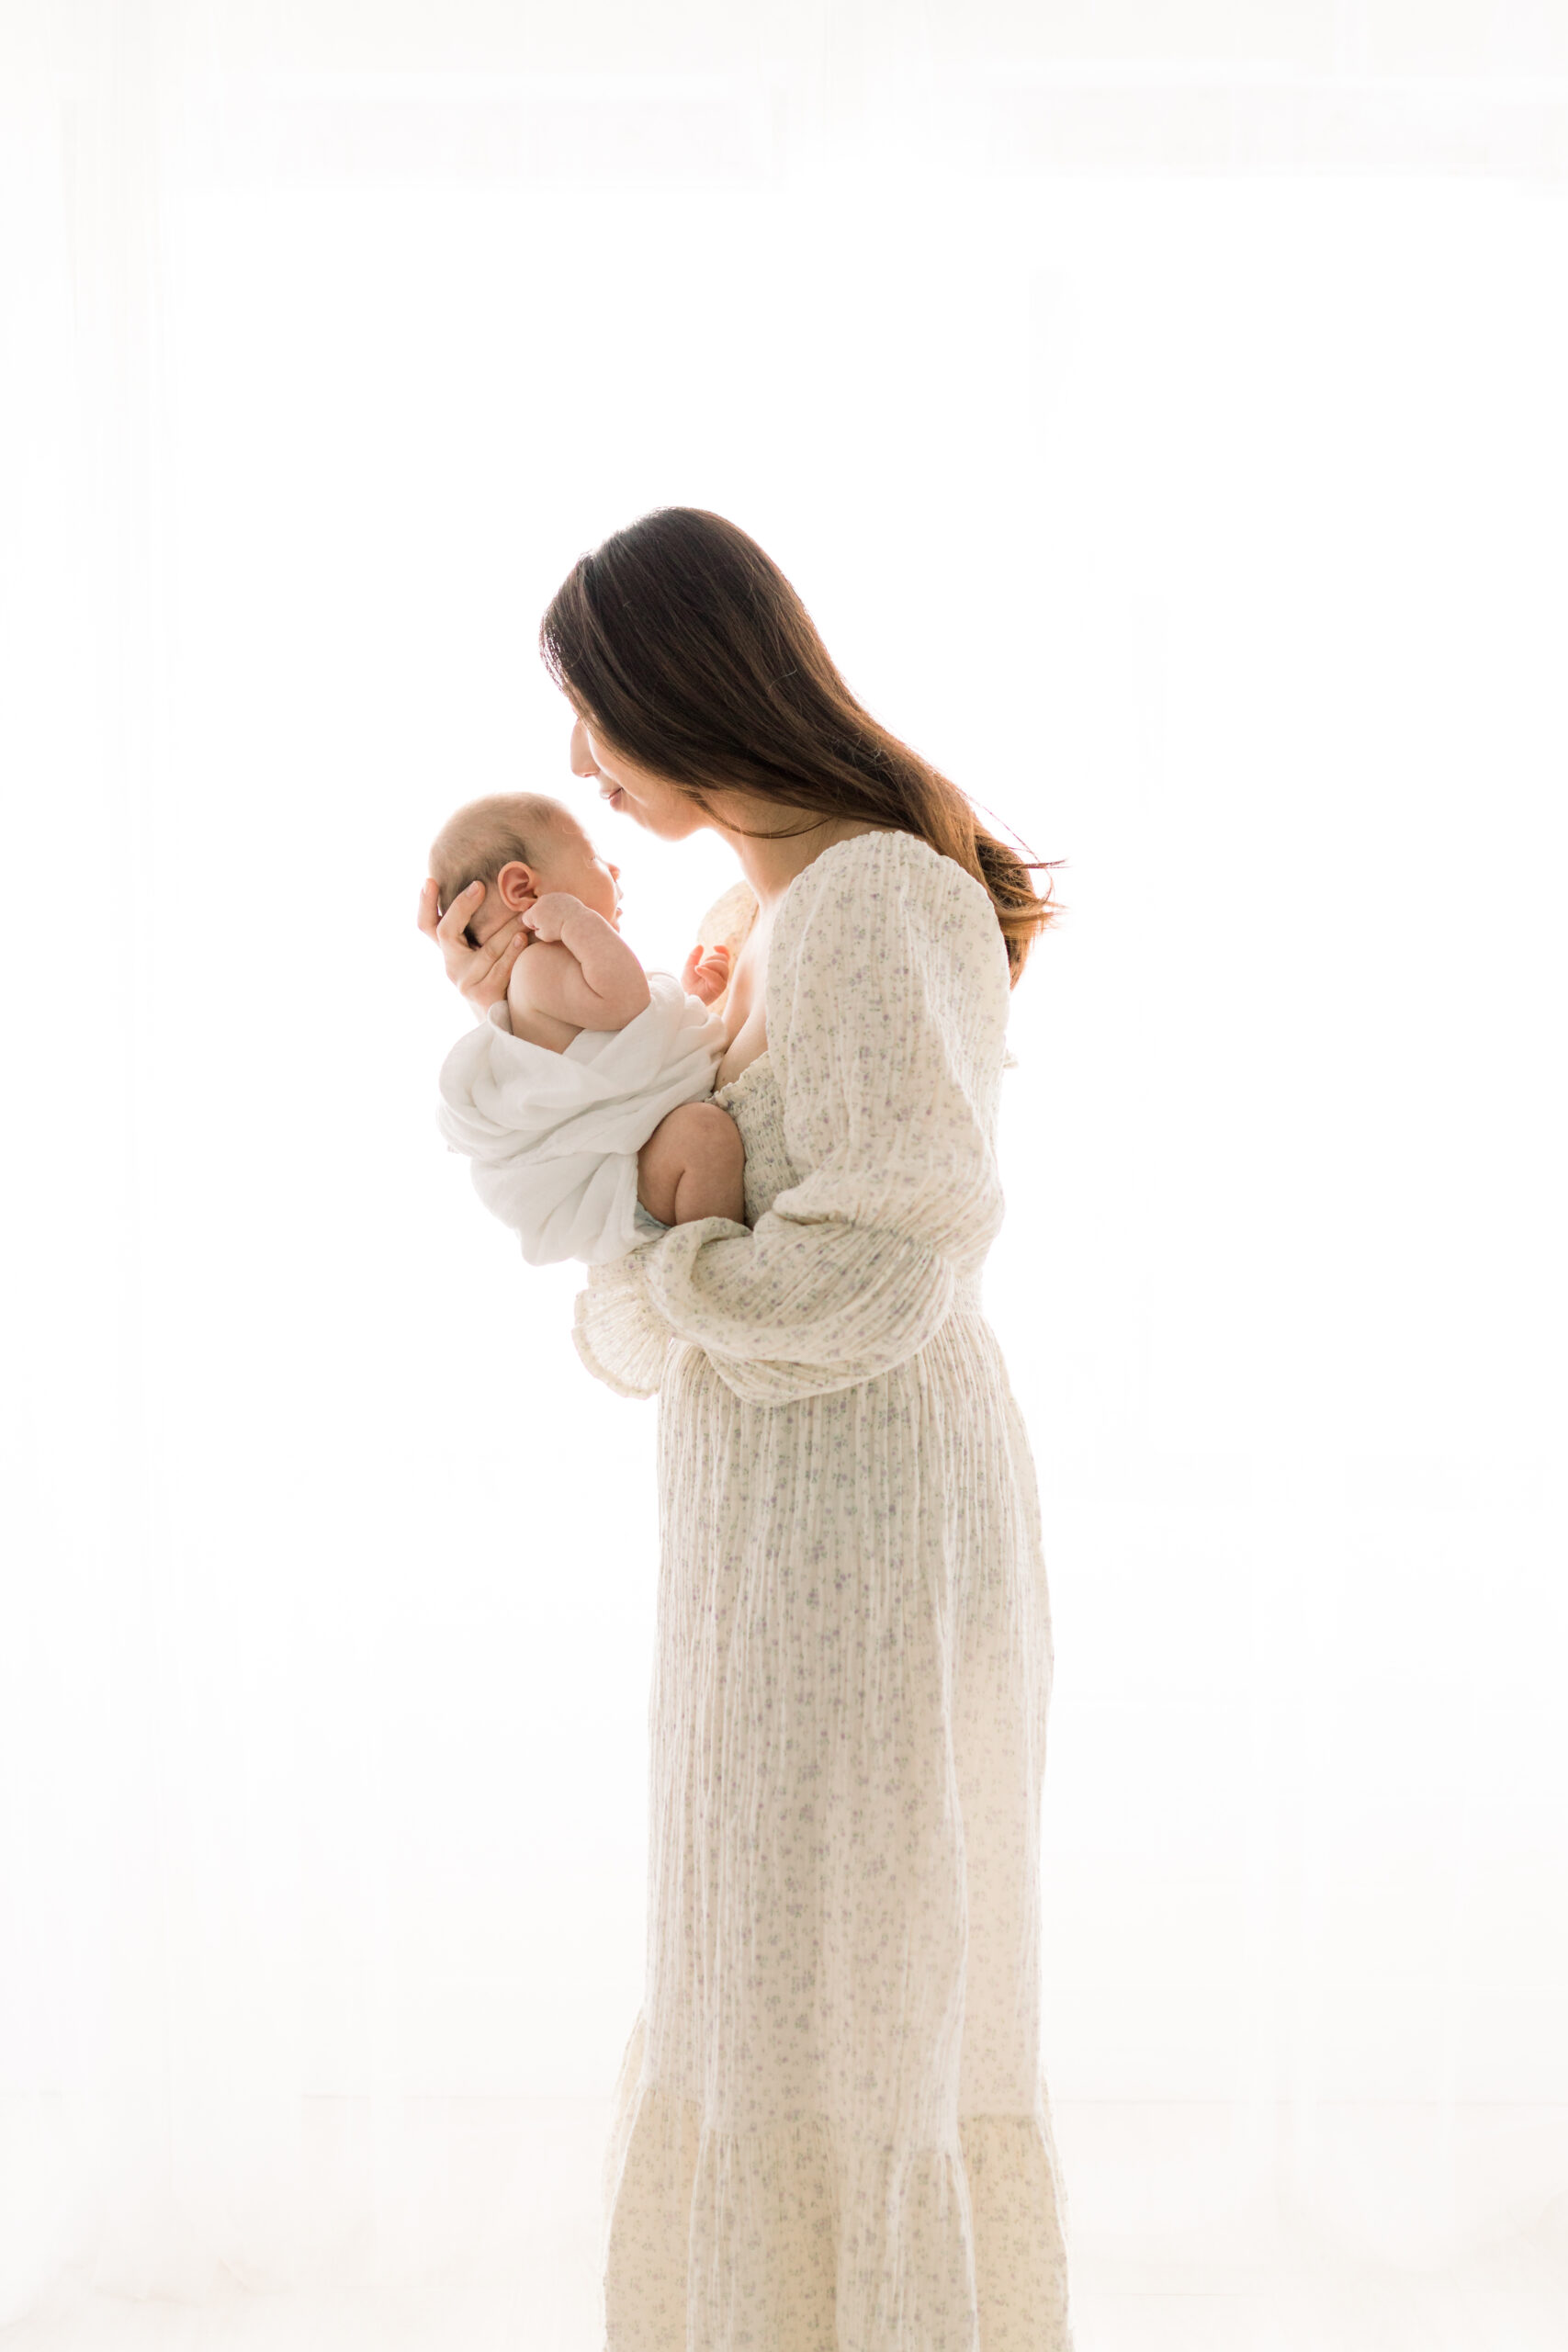 Photo of mom holding baby at a newborn photography burlington studio session at the Nook by Ericka Ana Photography